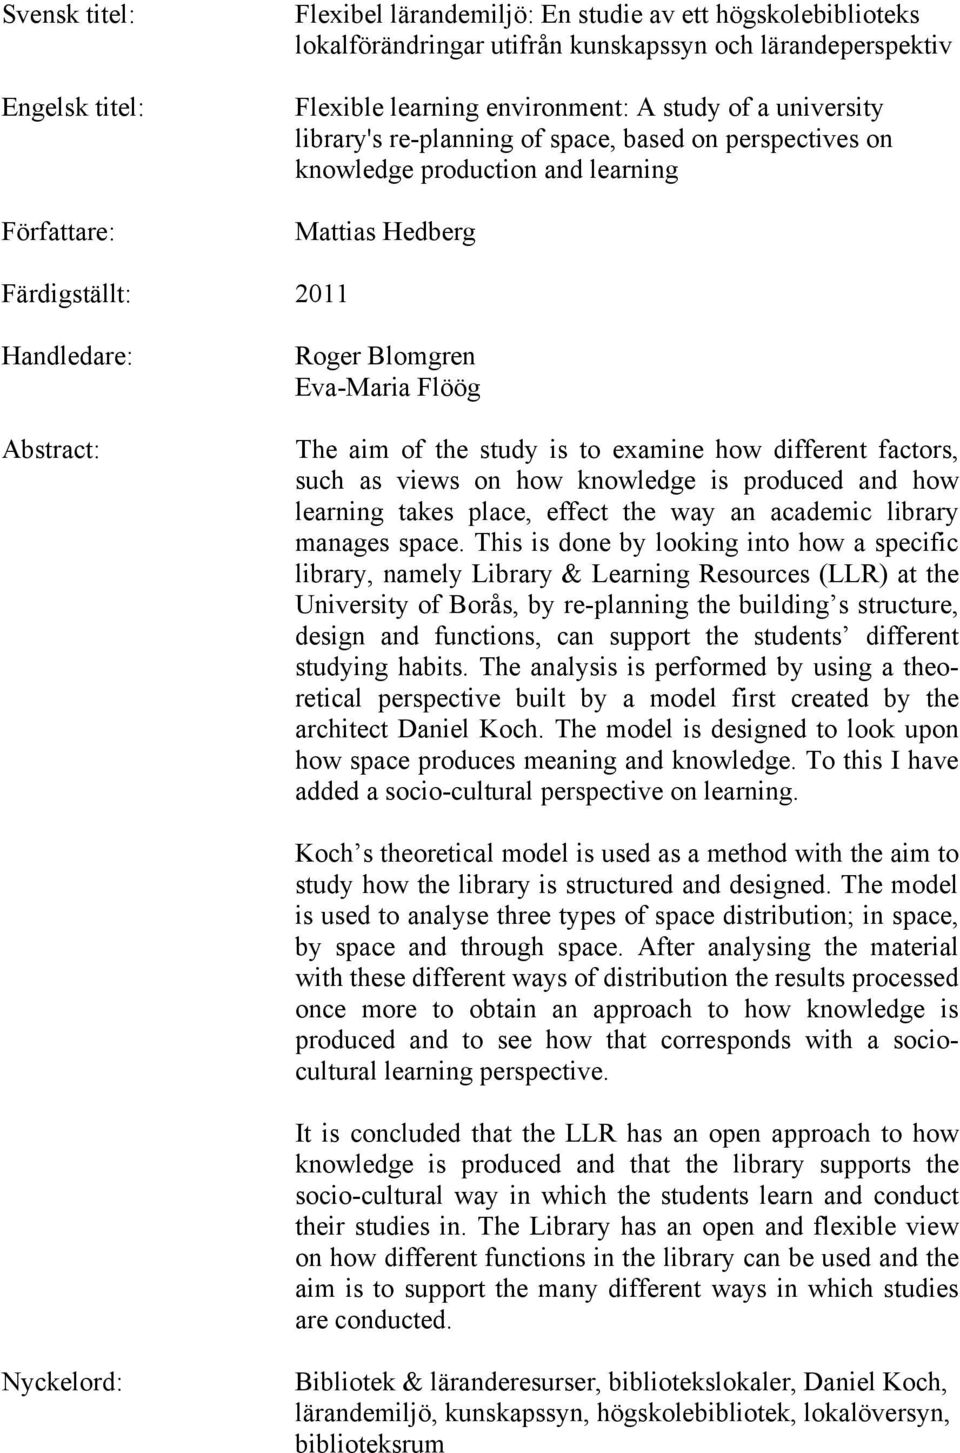 aim of the study is to examine how different factors, such as views on how knowledge is produced and how learning takes place, effect the way an academic library manages space.